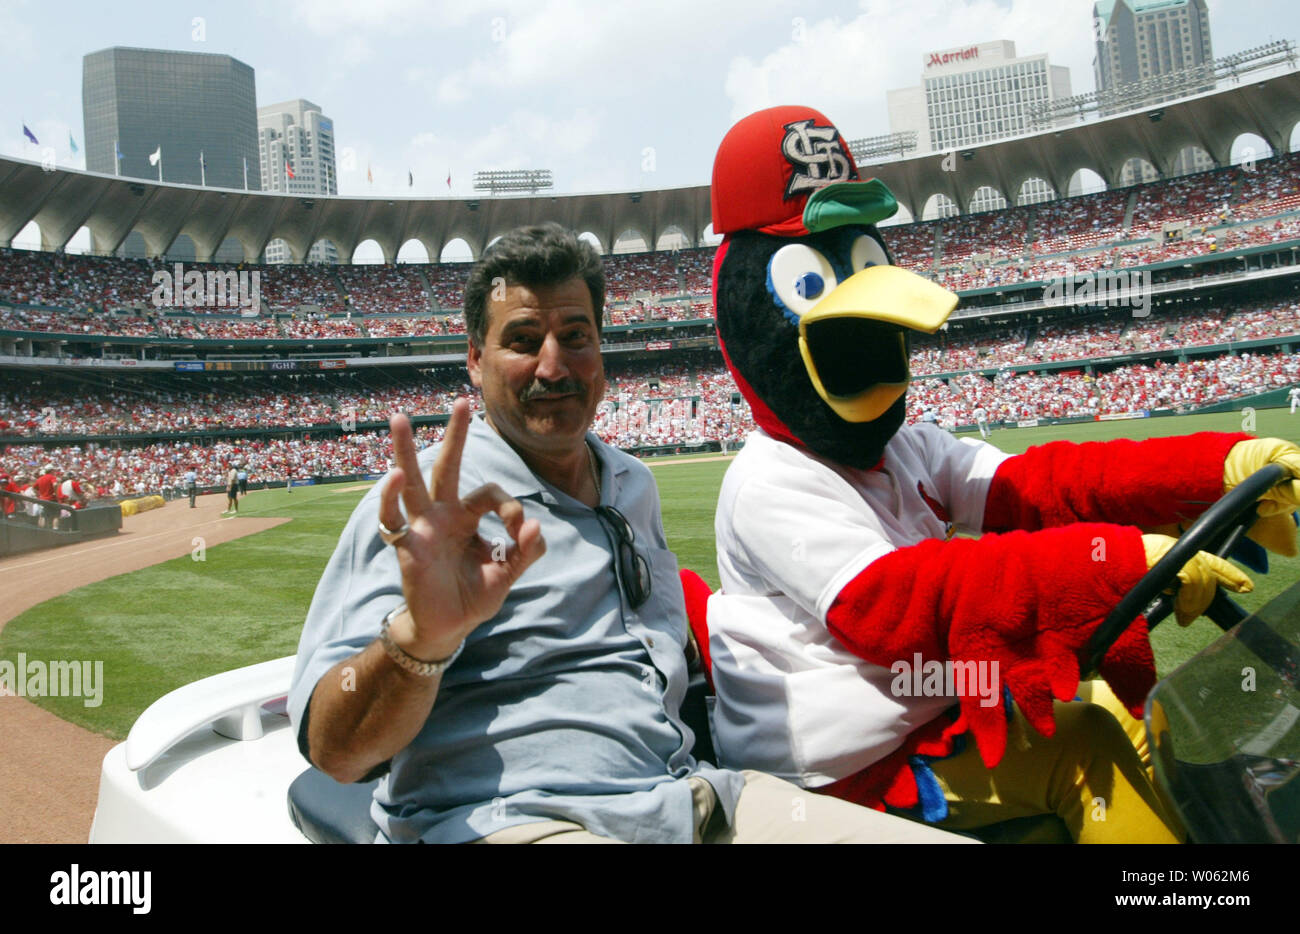 Former St. Louis Cardinals first baseman Keith Hernandez gets a ride from the Cardinals mascot Fredbird before pulling down the number 36 off of the Busch Stadium rightfield wall during a game against the Houston Astros in St. Louis on July 17, 2005. After today's game, only 35 will remain before St. Louis plays next year in a new facility next door. (UPI Photo/Bill Greenblatt) Stock Photo